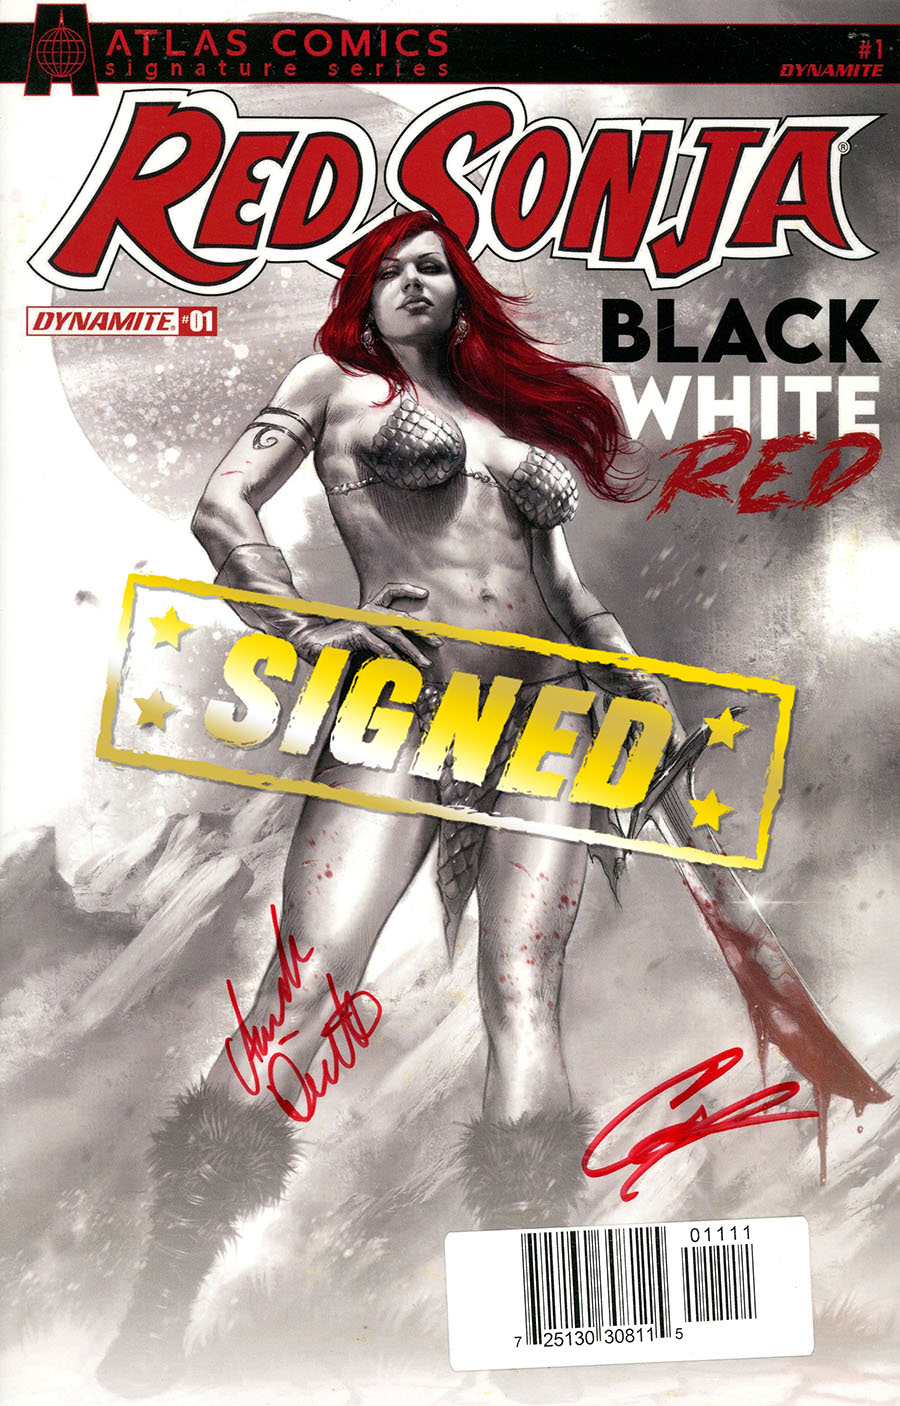 Red Sonja Black White Red #1 Cover O Atlas Comics Signature Series Signed By Amanda Deibert & Cat Staggs